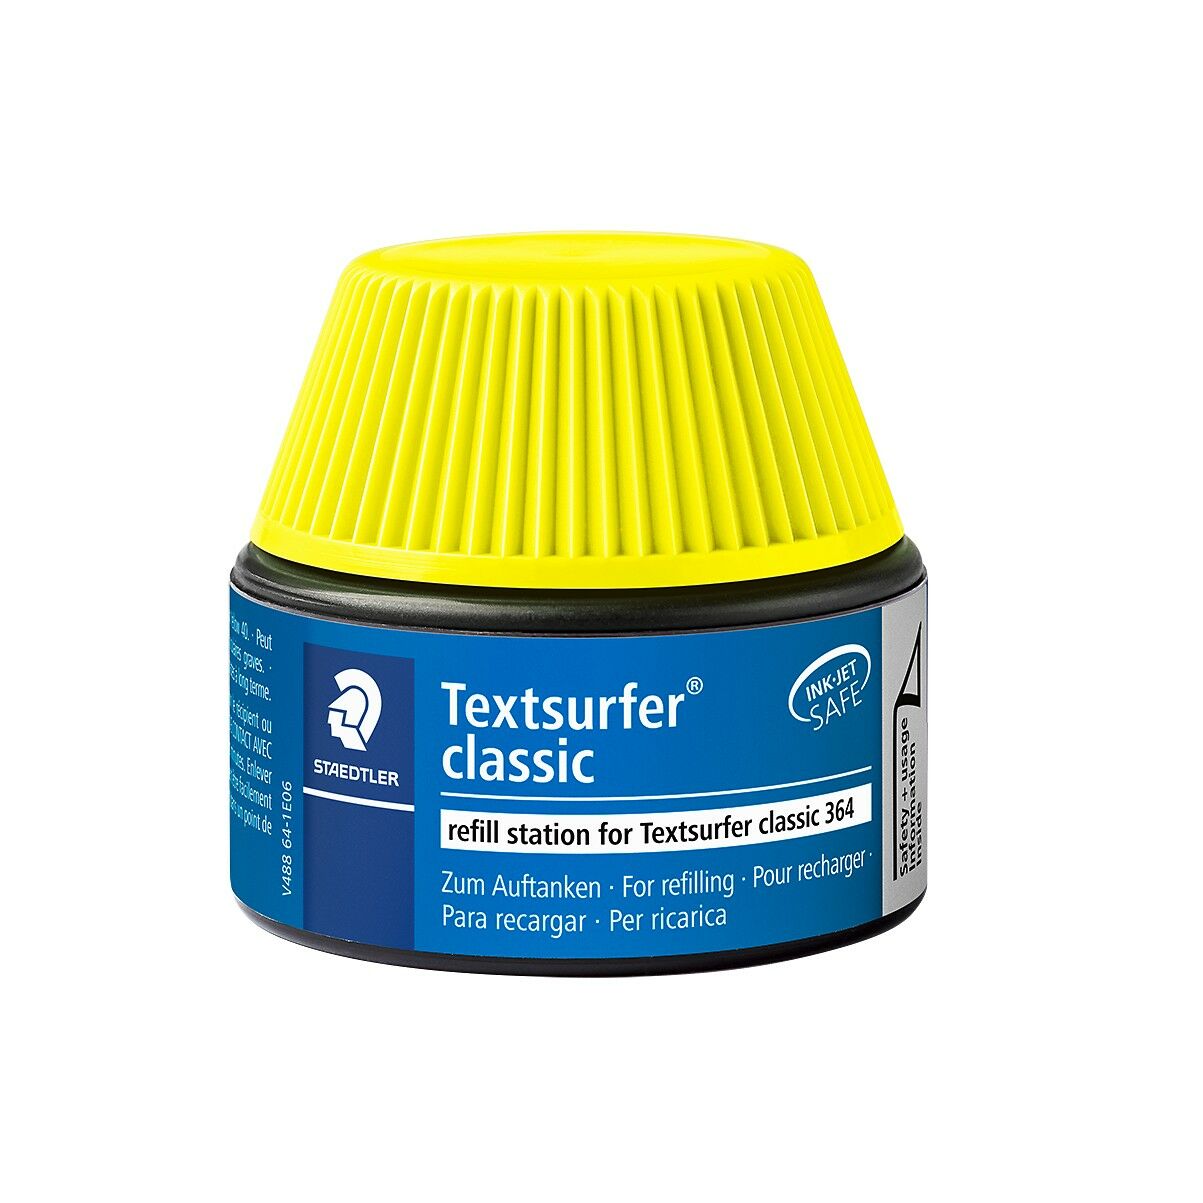 Textsurfer® classic refill station 488 64 - Recharge pour Textsurfer classic 364